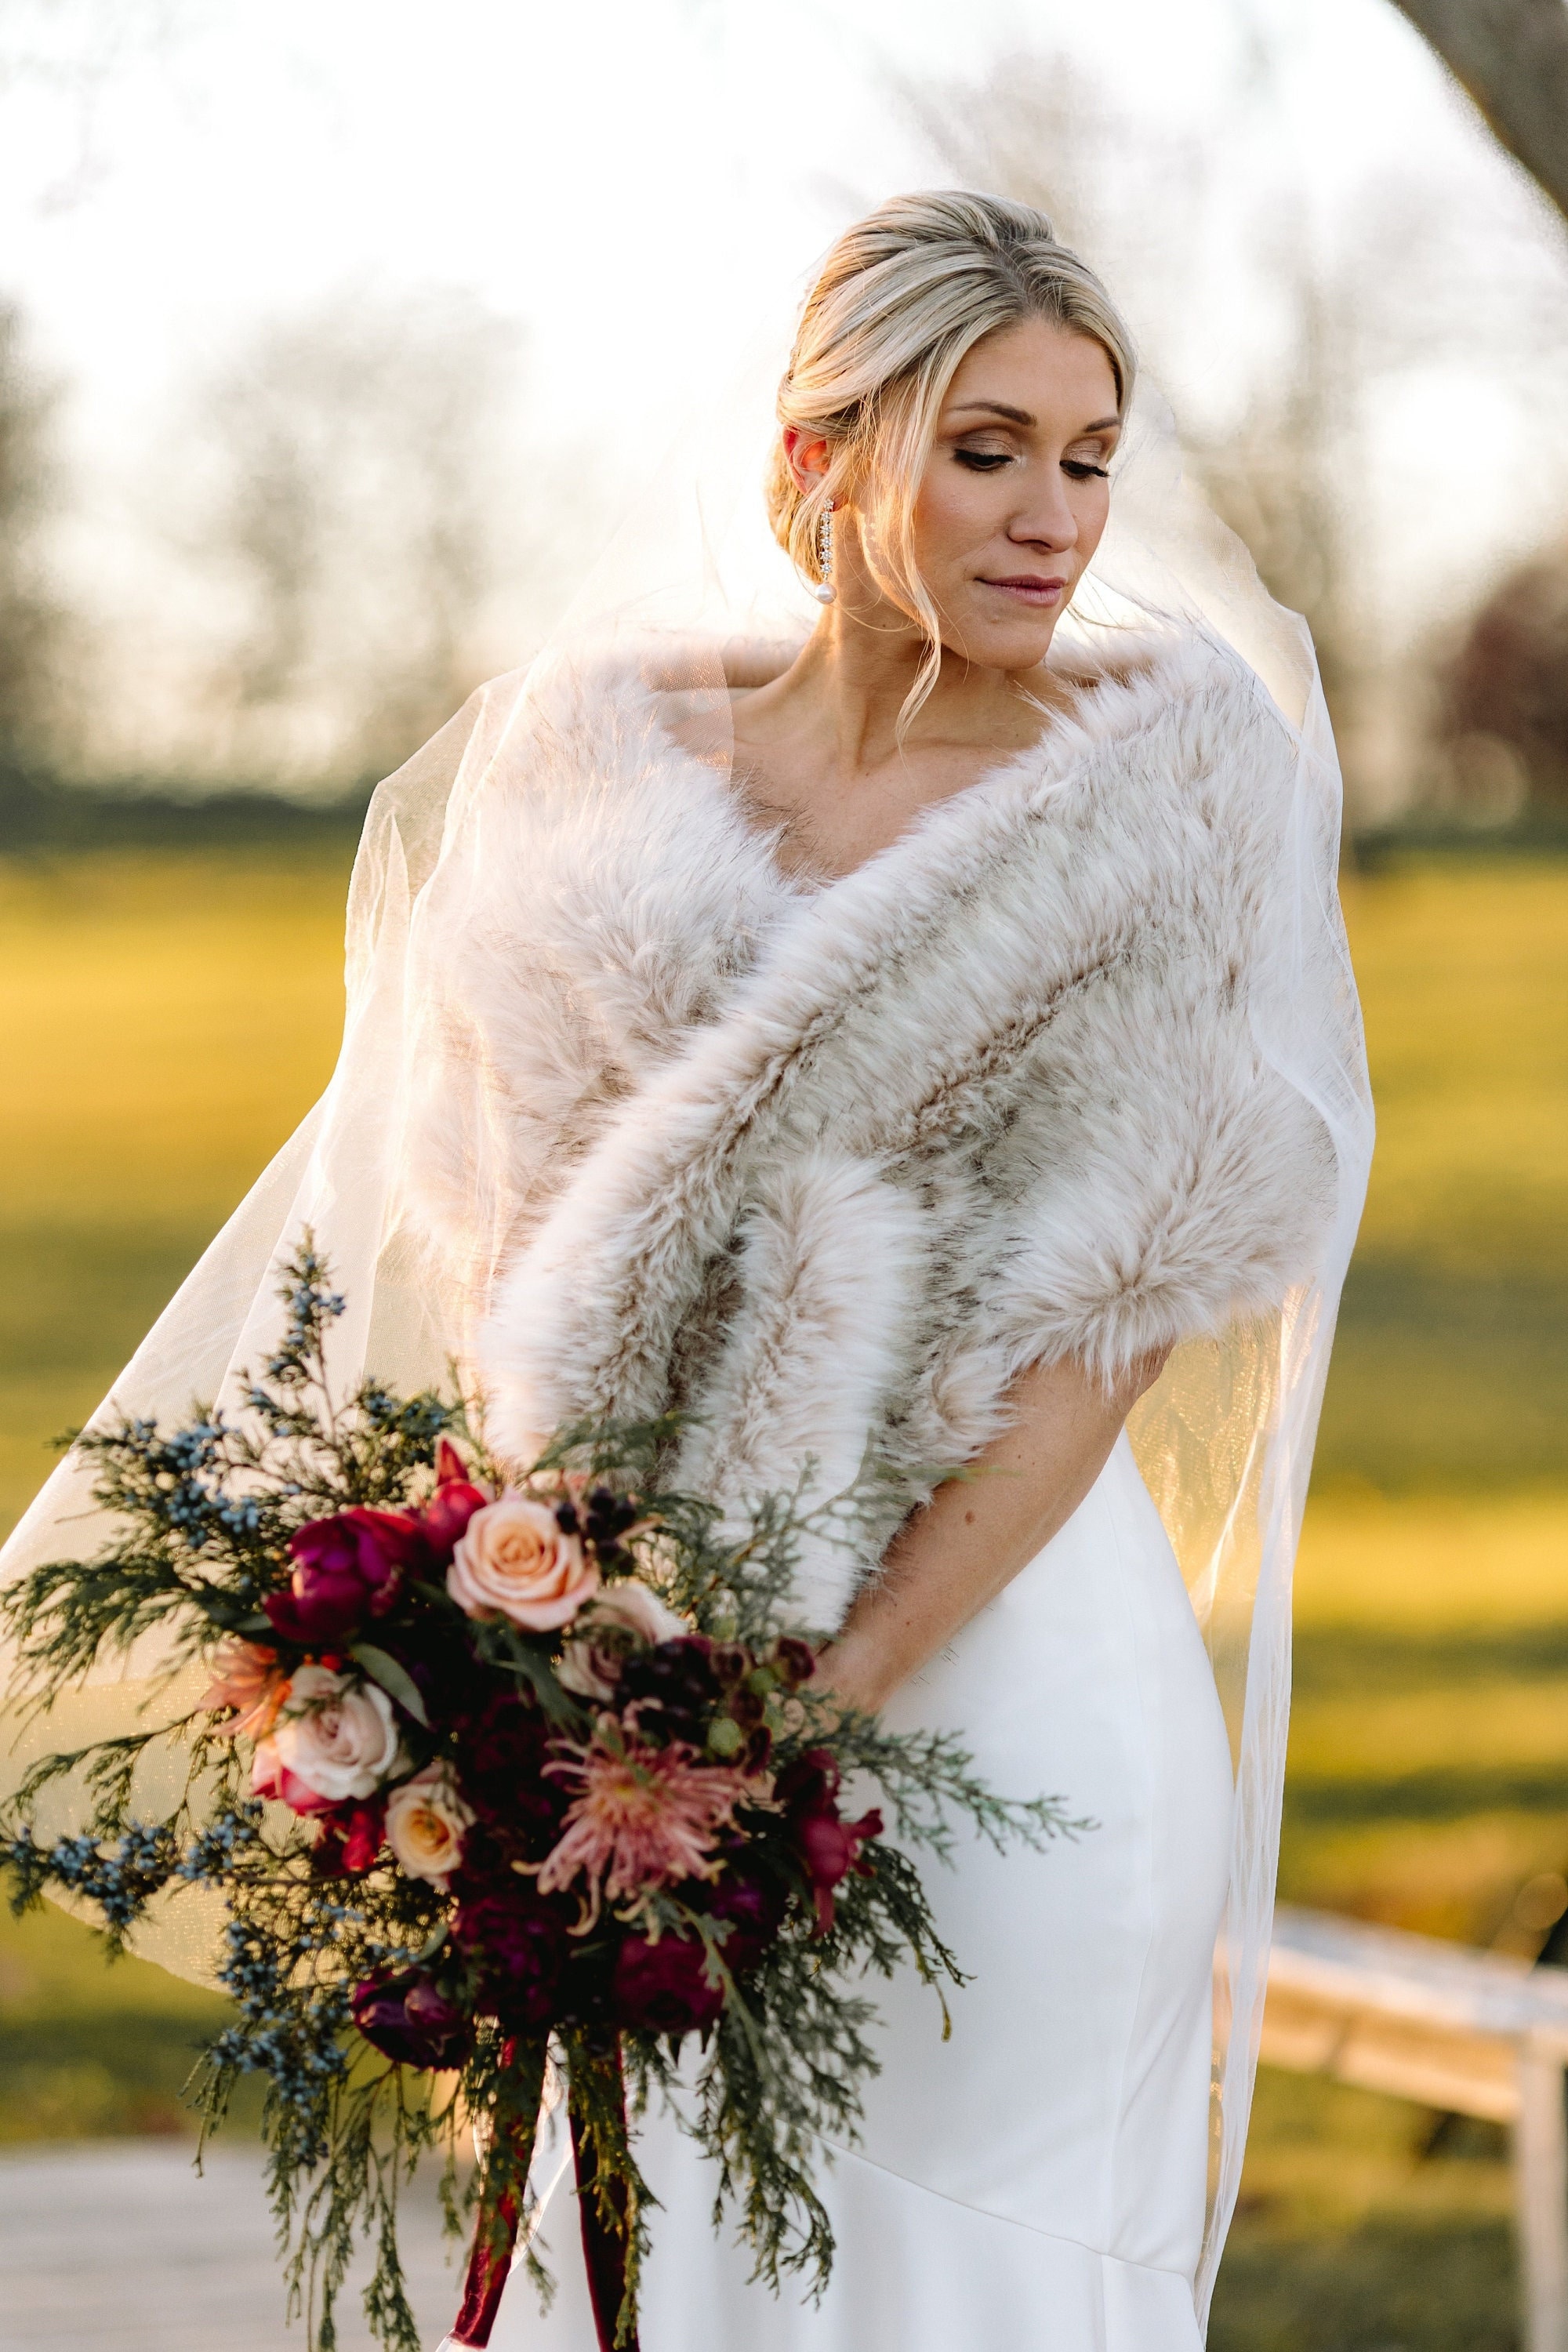 Bride wearing a shaggy fur shawl for Christmas wedding | Winter wedding  outfits, Outdoor winter wedding, Winter wedding dress